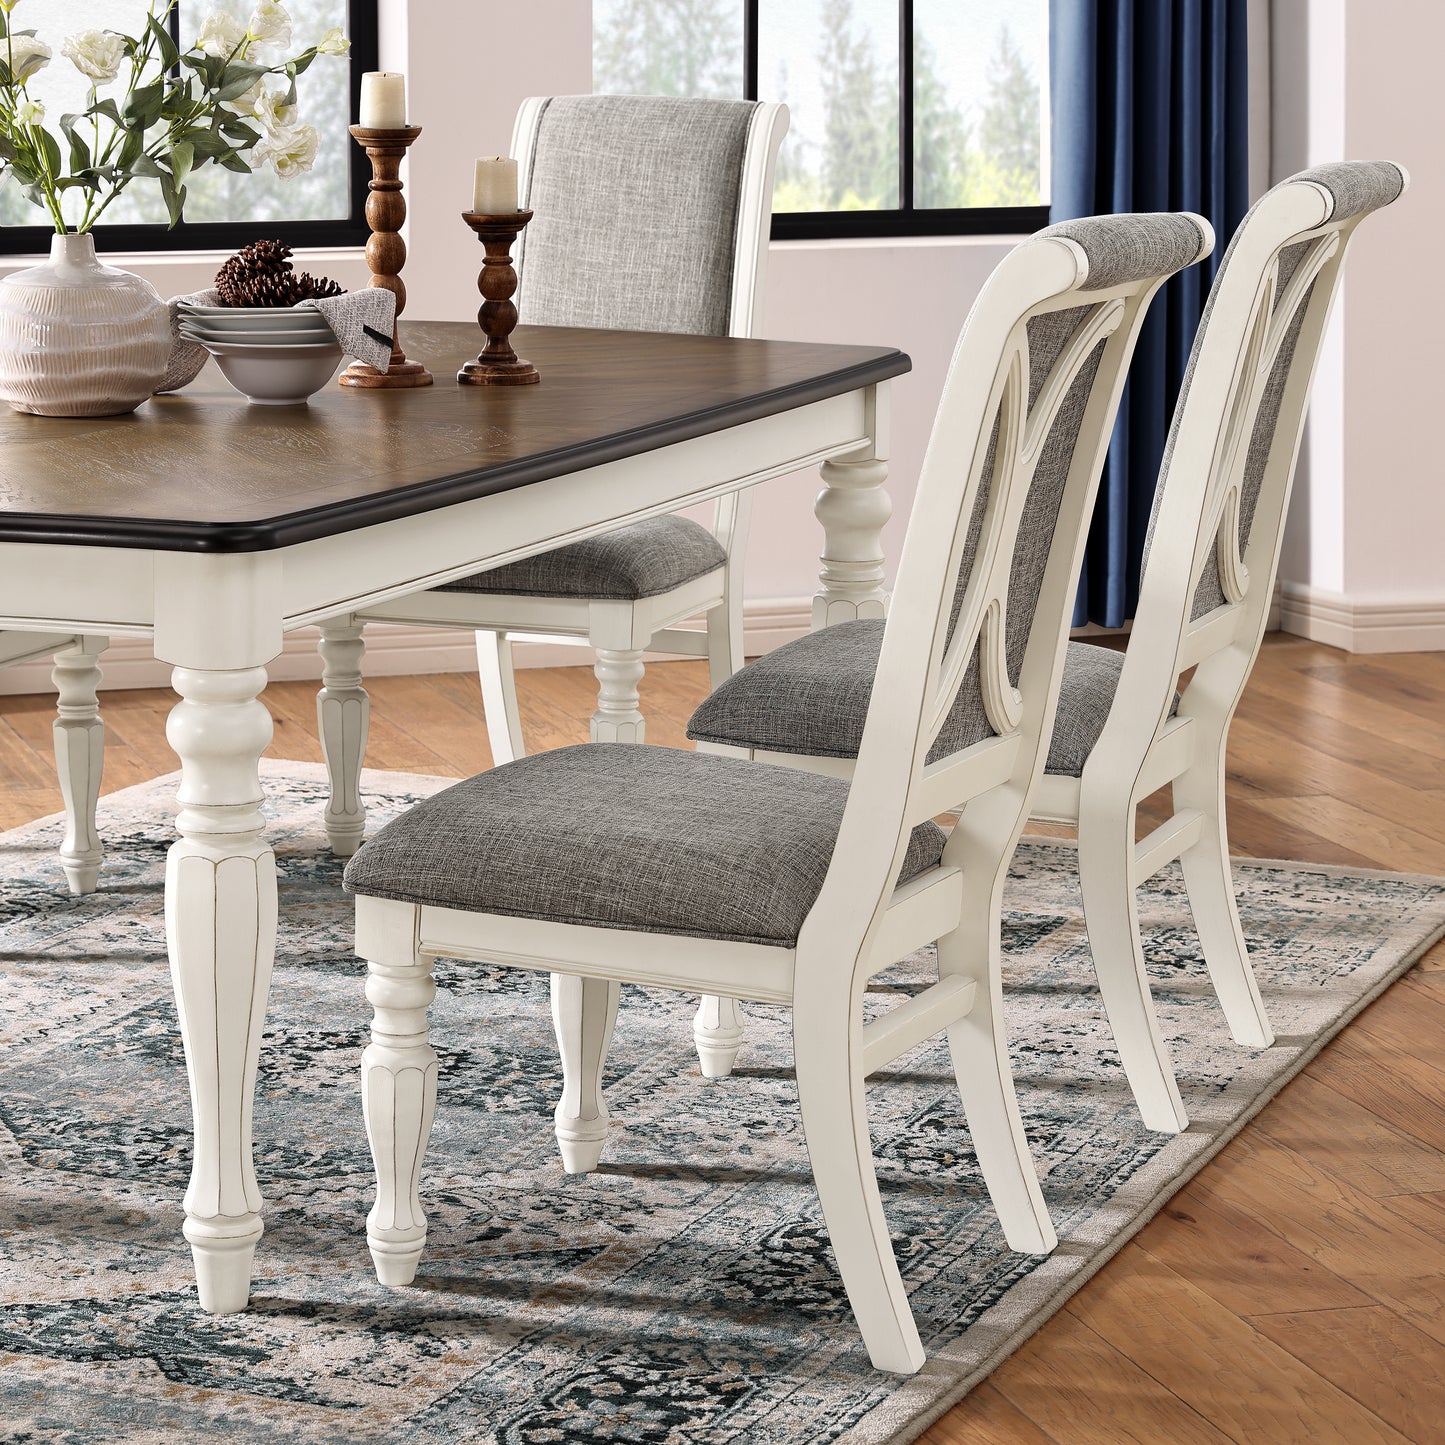 Roundhill Furniture Belleza French Country 7-Piece Dining Set in Antique White and Weathered Oak Finish